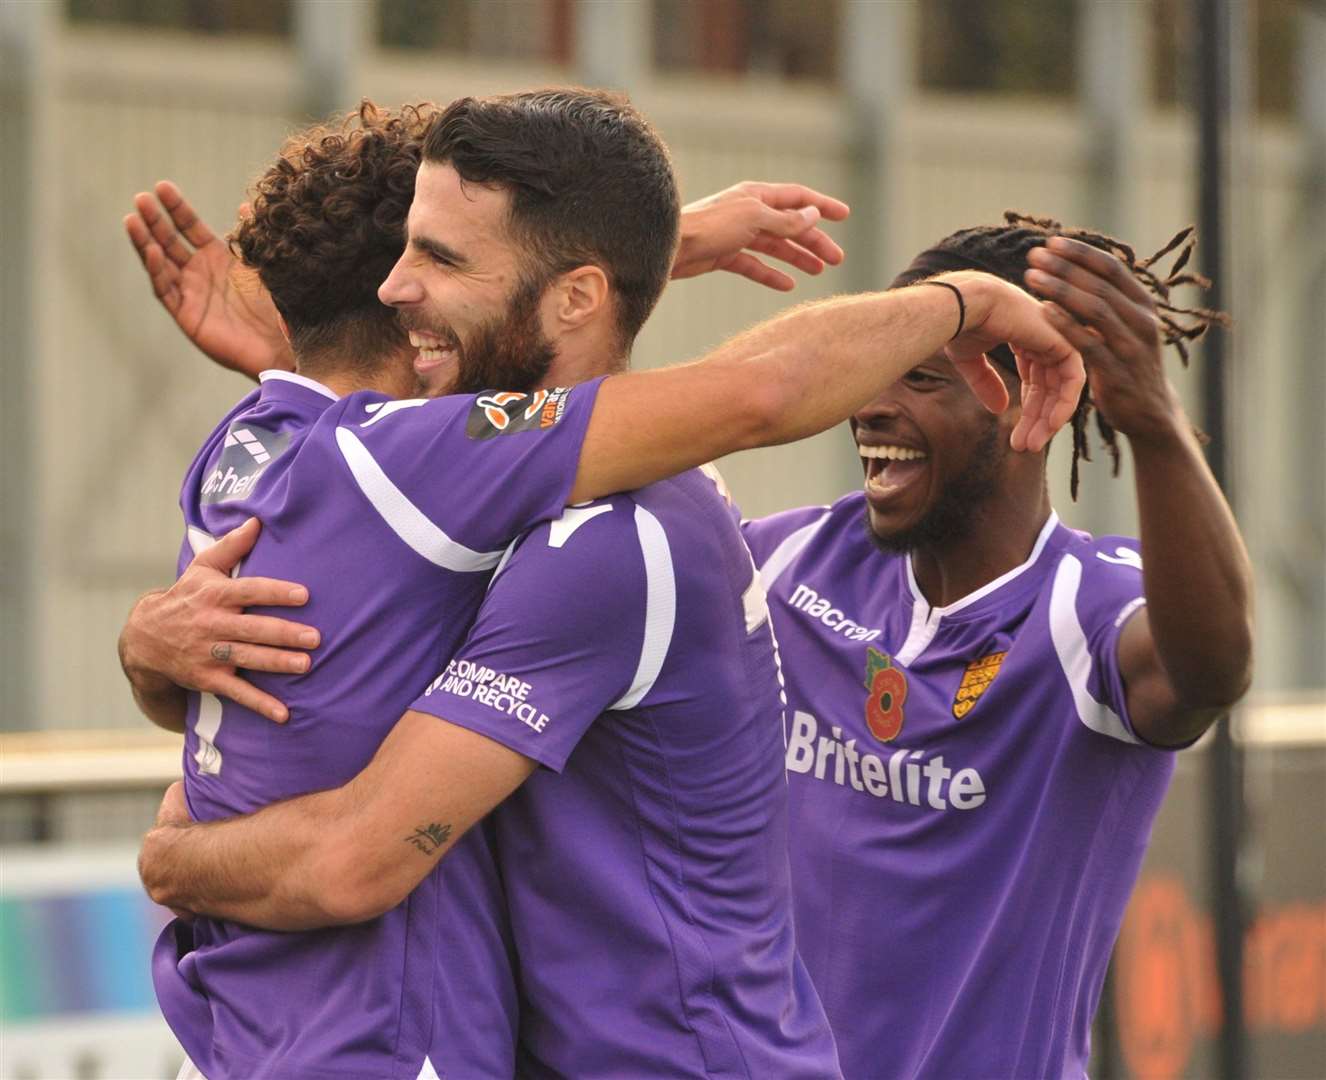 Joan Luque congratulates George Porter on his first goal at Slough Picture: Steve Terrell